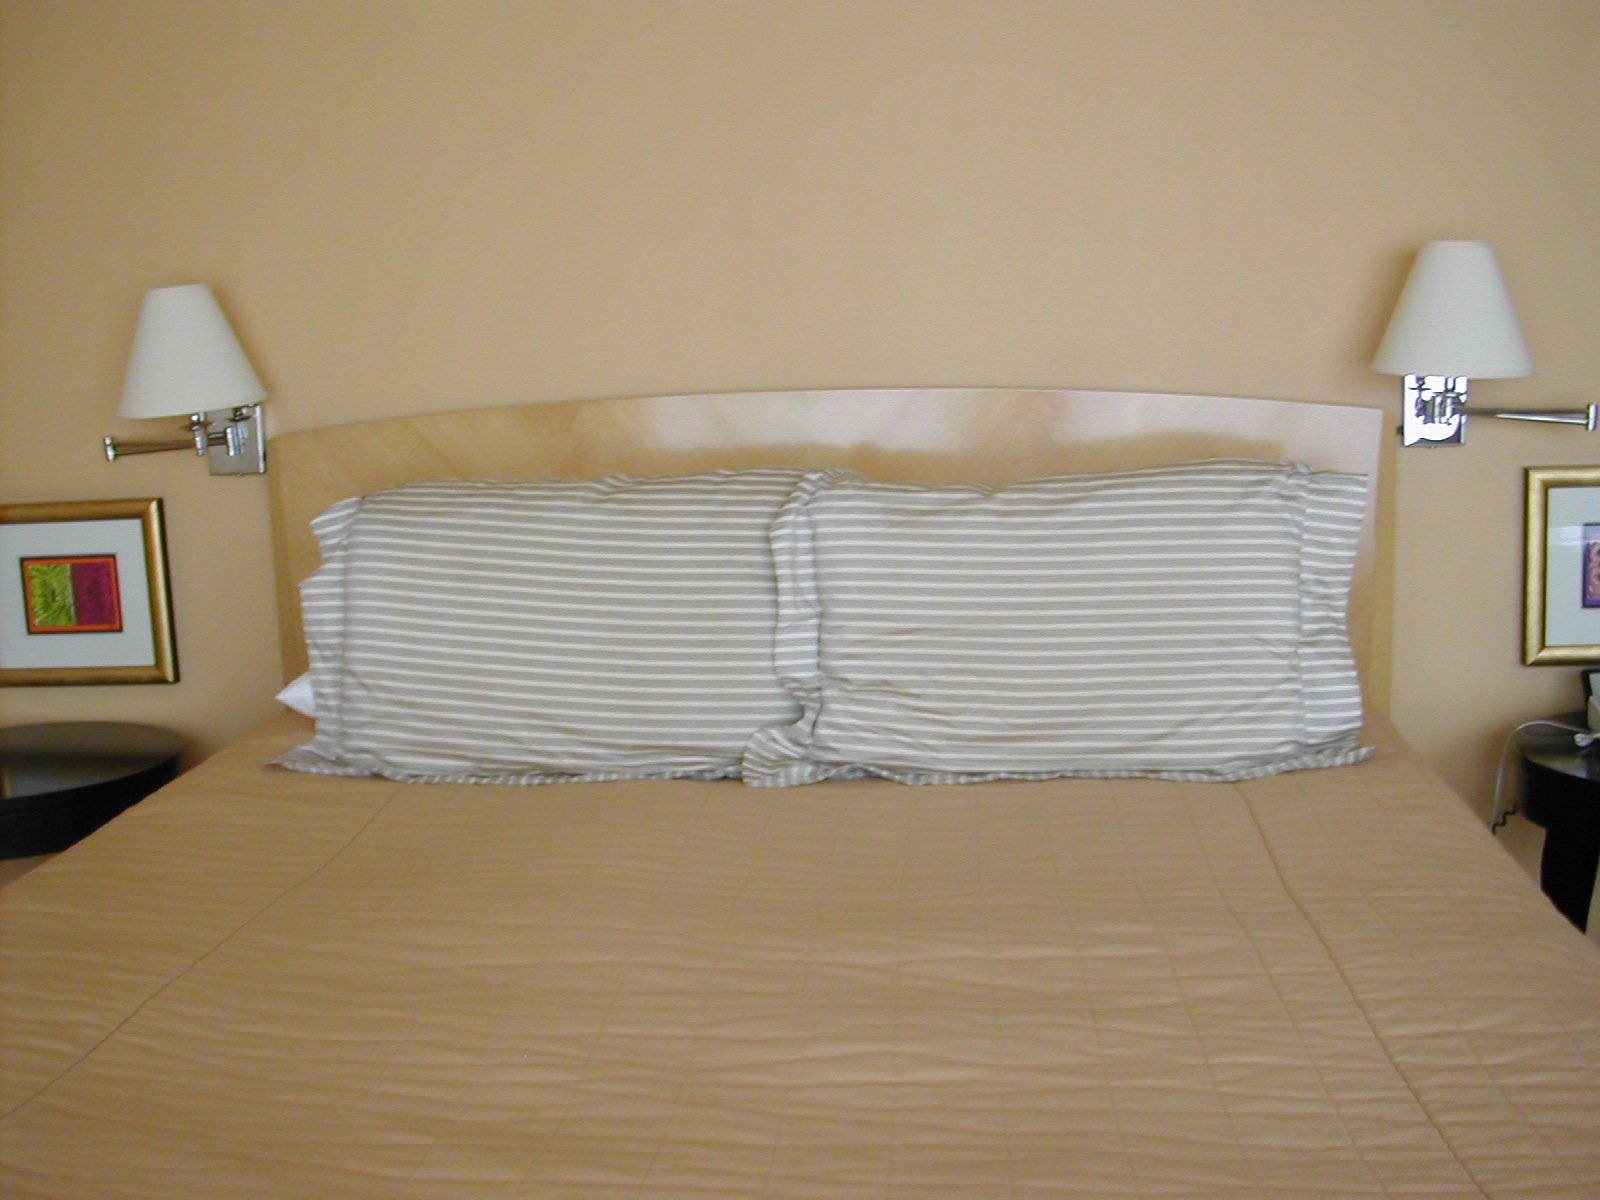 a bed has a beige bedspread with white pillows